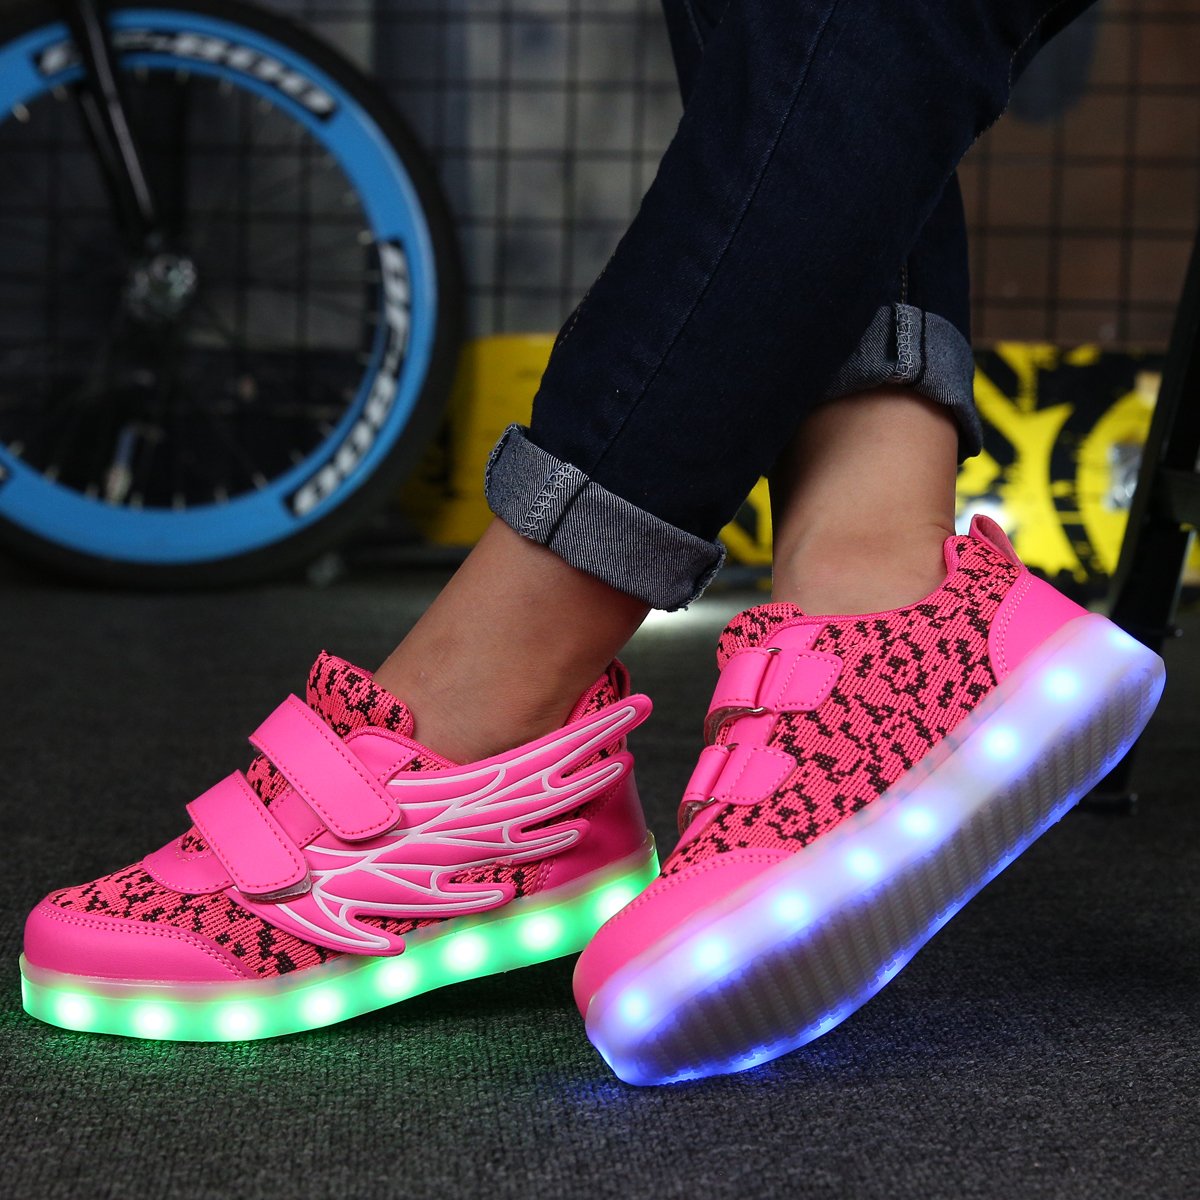 7 Colors LED Shoes Flashing Rechargeable Sneakers - kids